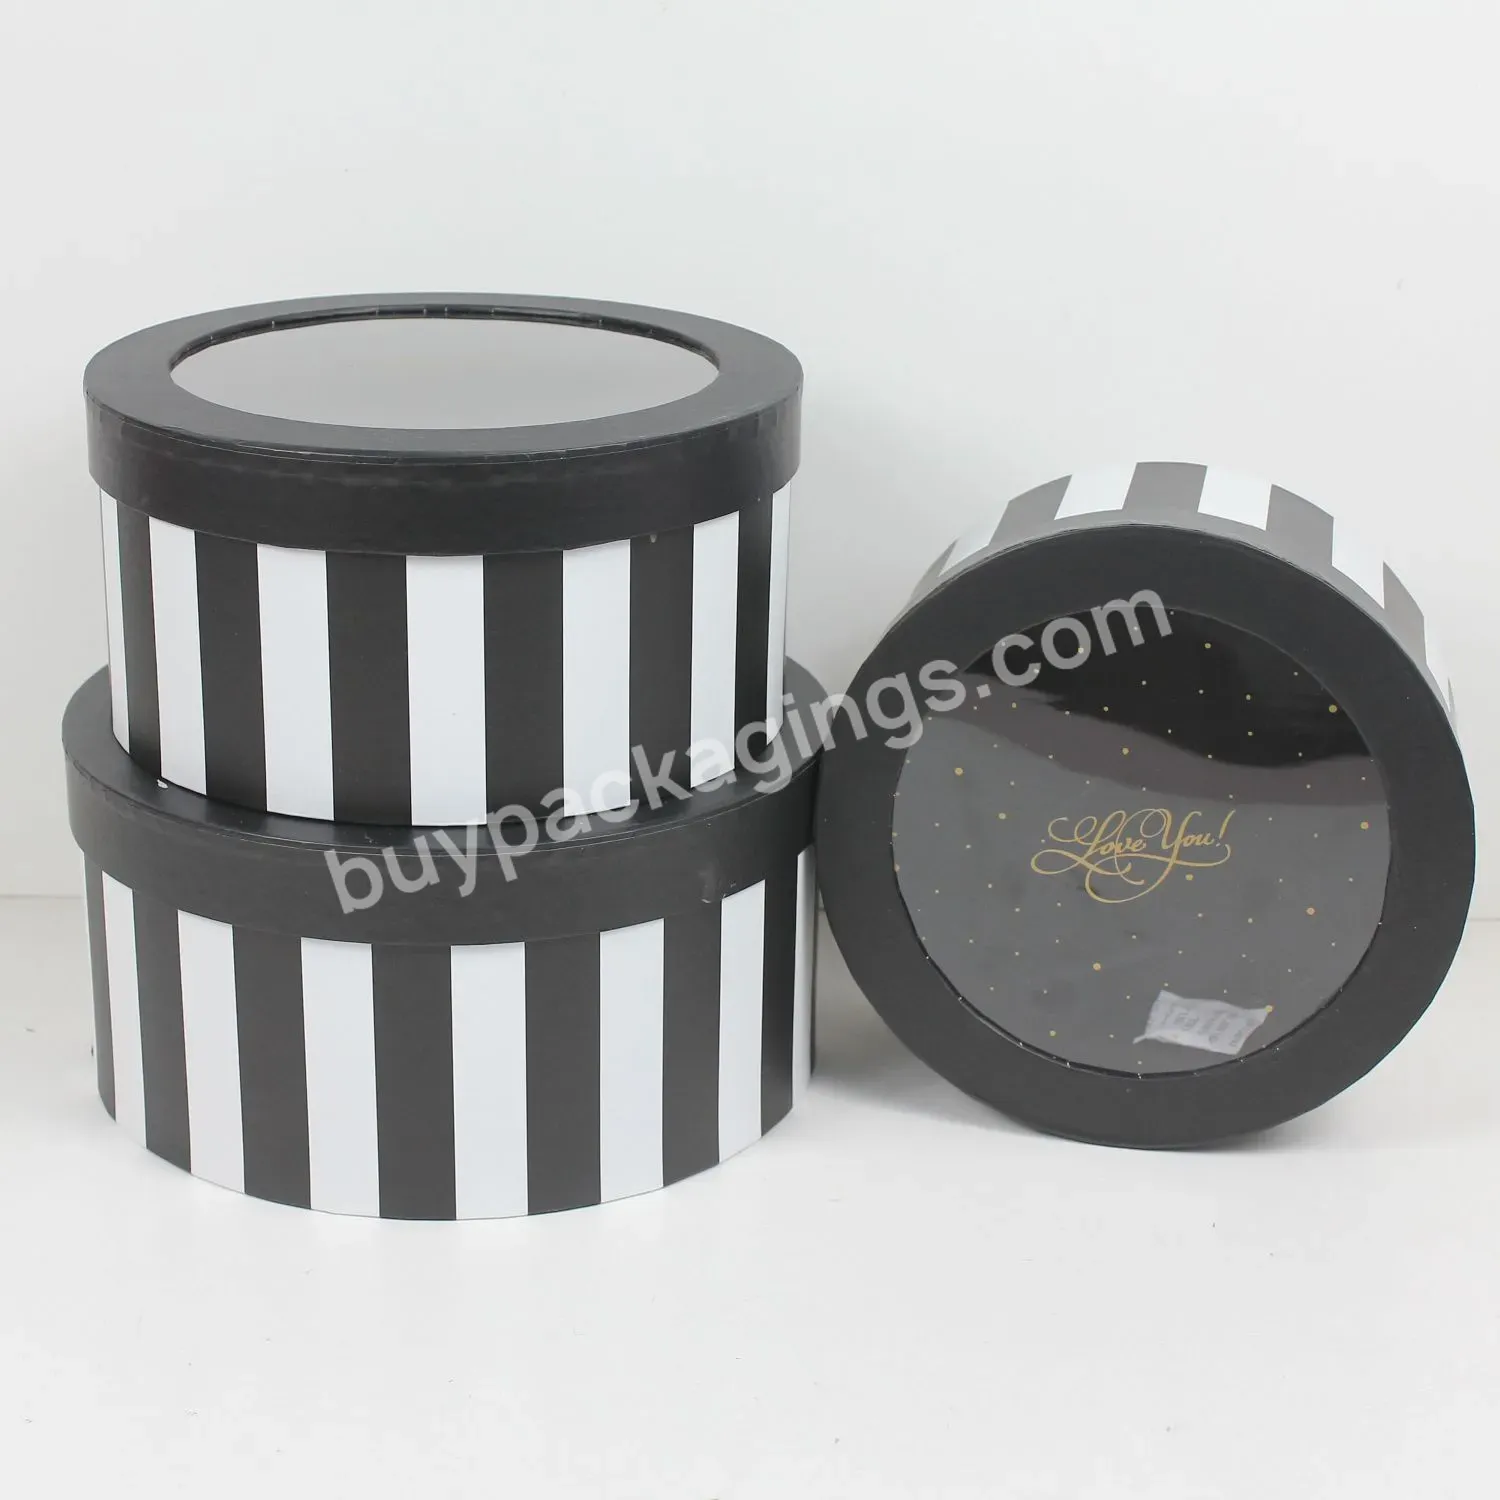 Wholesale Rounded Flower Box Arrangement Clear Pvc Window Paper Box With Striped Pattern Printing